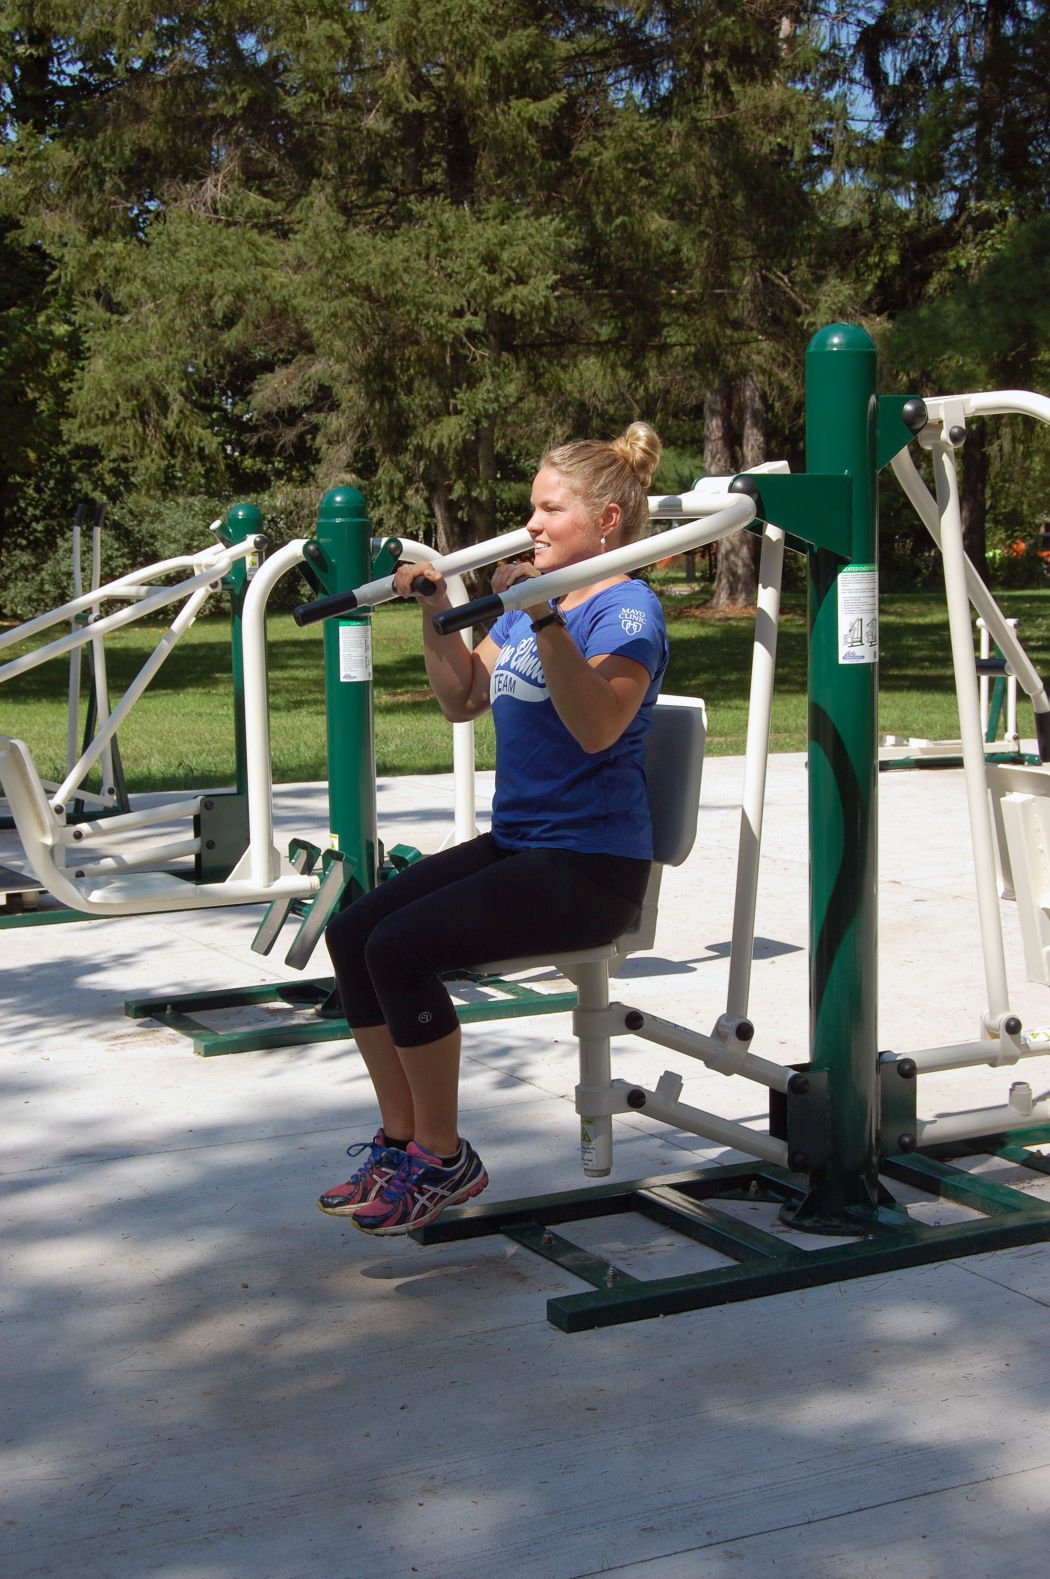 Grand opening for outdoor fitness equipment | Community | chippewa.com